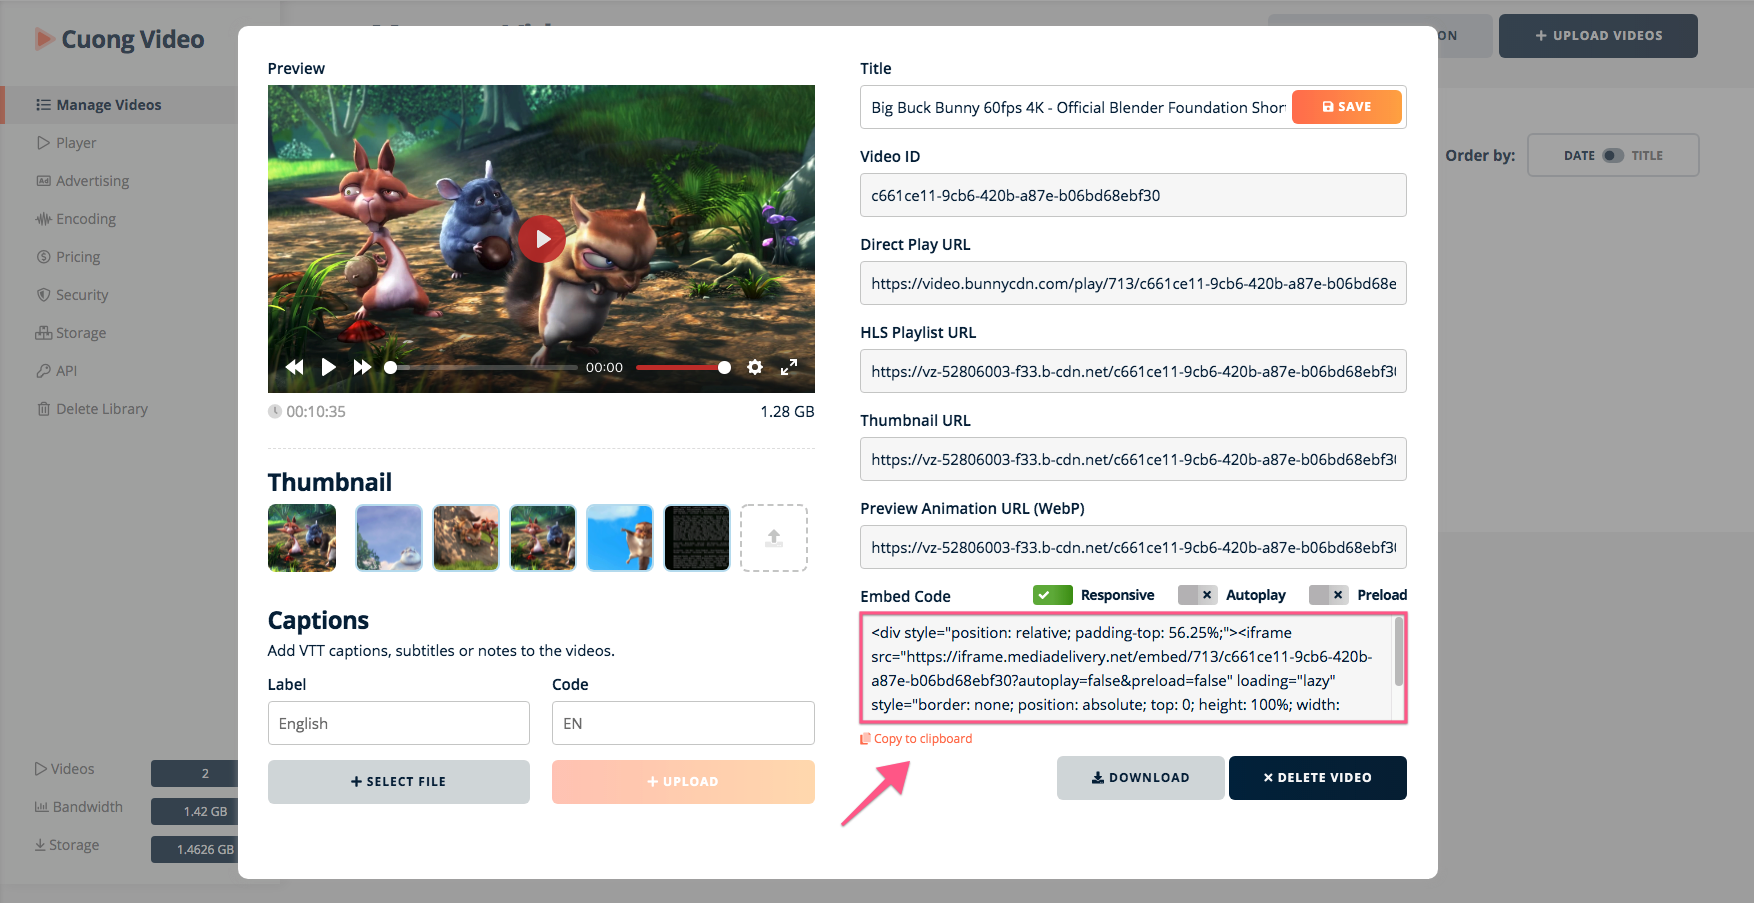 Get the Embed Code of the video you just uploaded (after encoding)